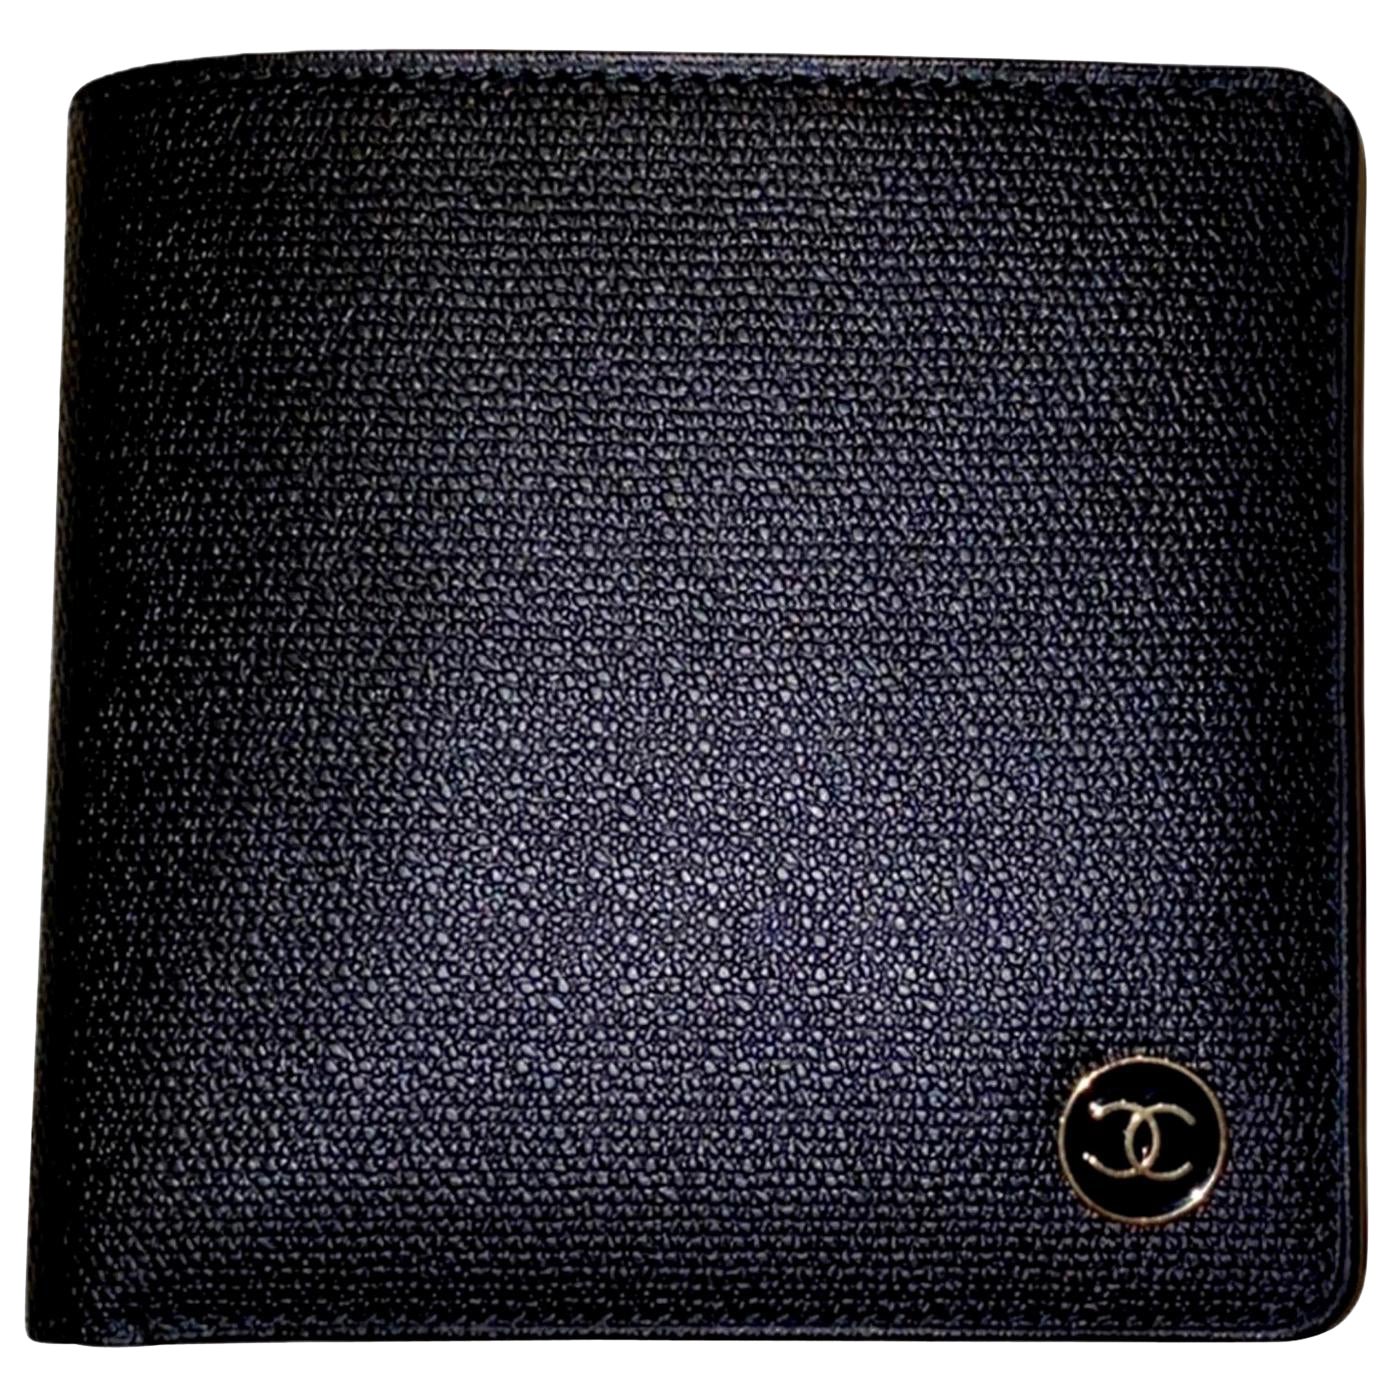 NEW Chanel Black CC Logo Flap Wallet - Full Set with Box & Card For Sale